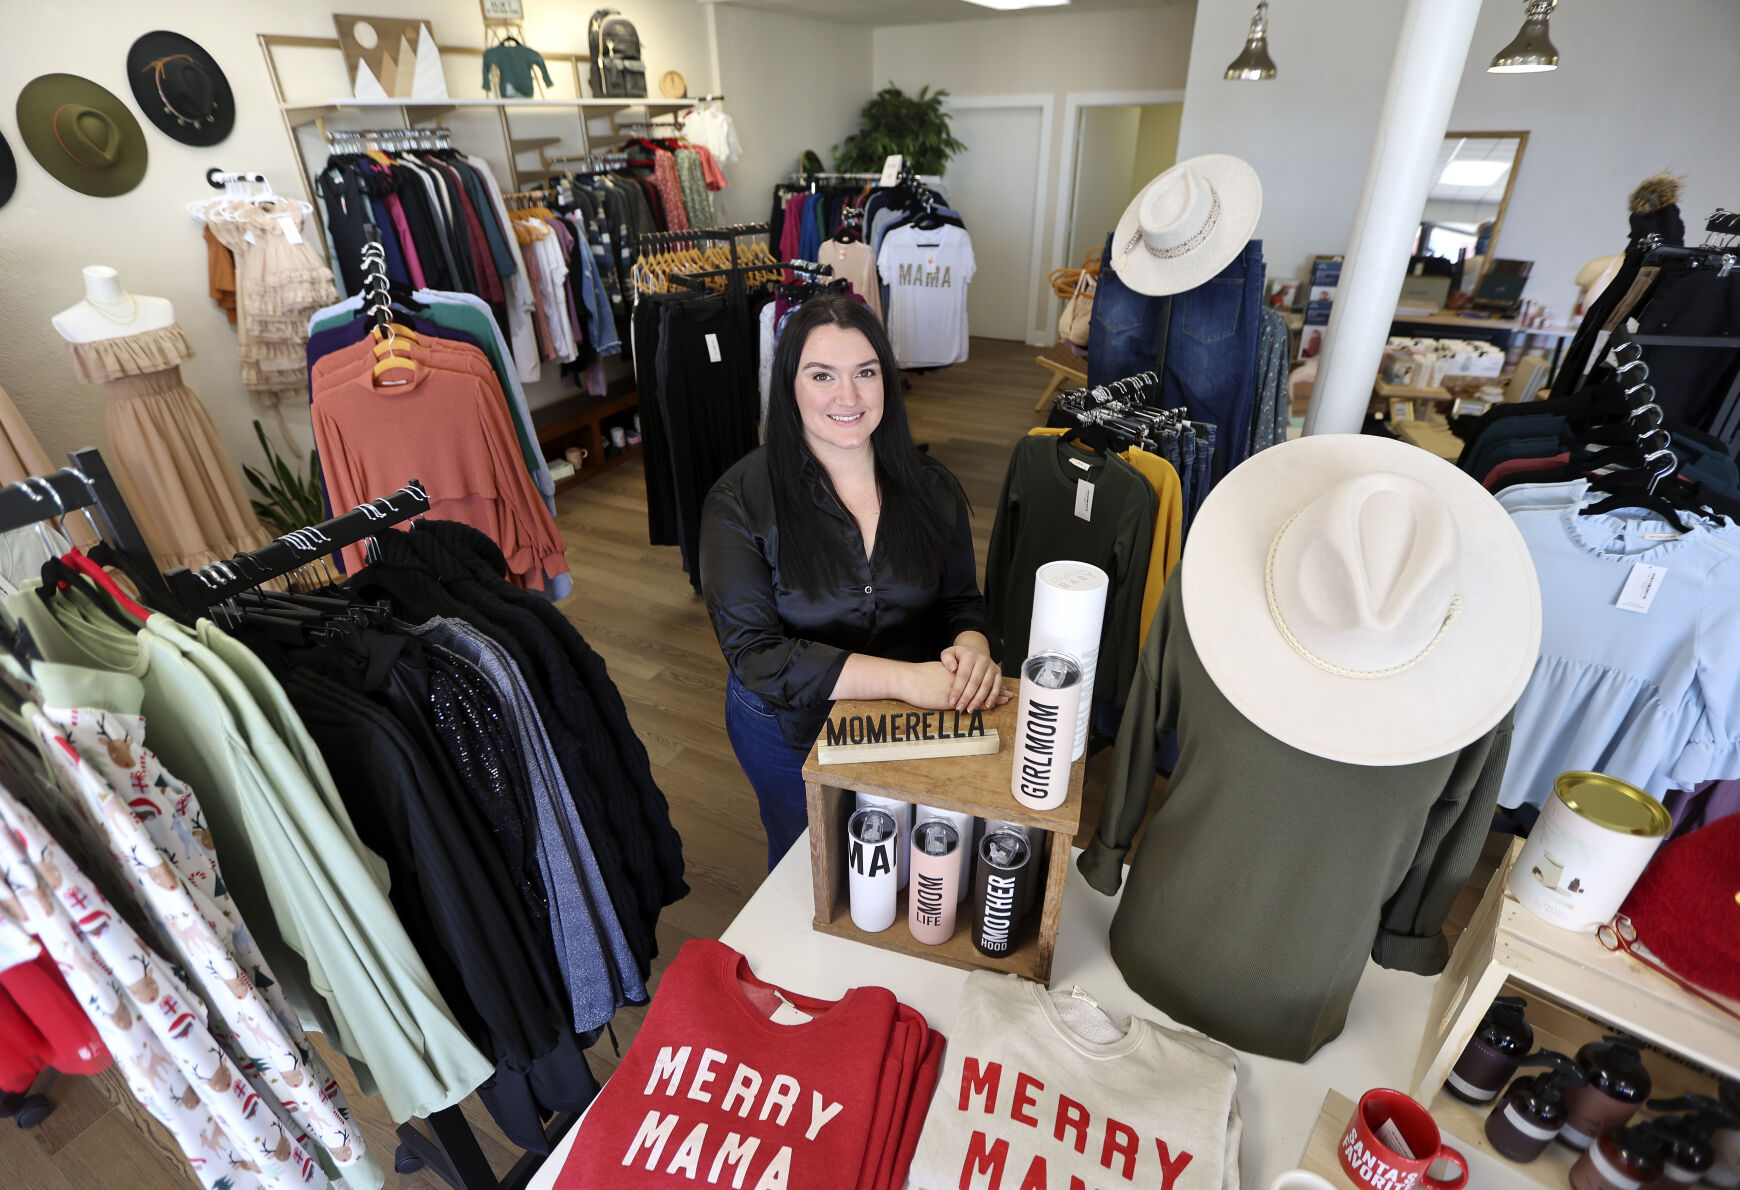 Anna Meadows is the owner of Momerella located at 197 Main St. in Dubuque.    PHOTO CREDIT: Dave Kettering